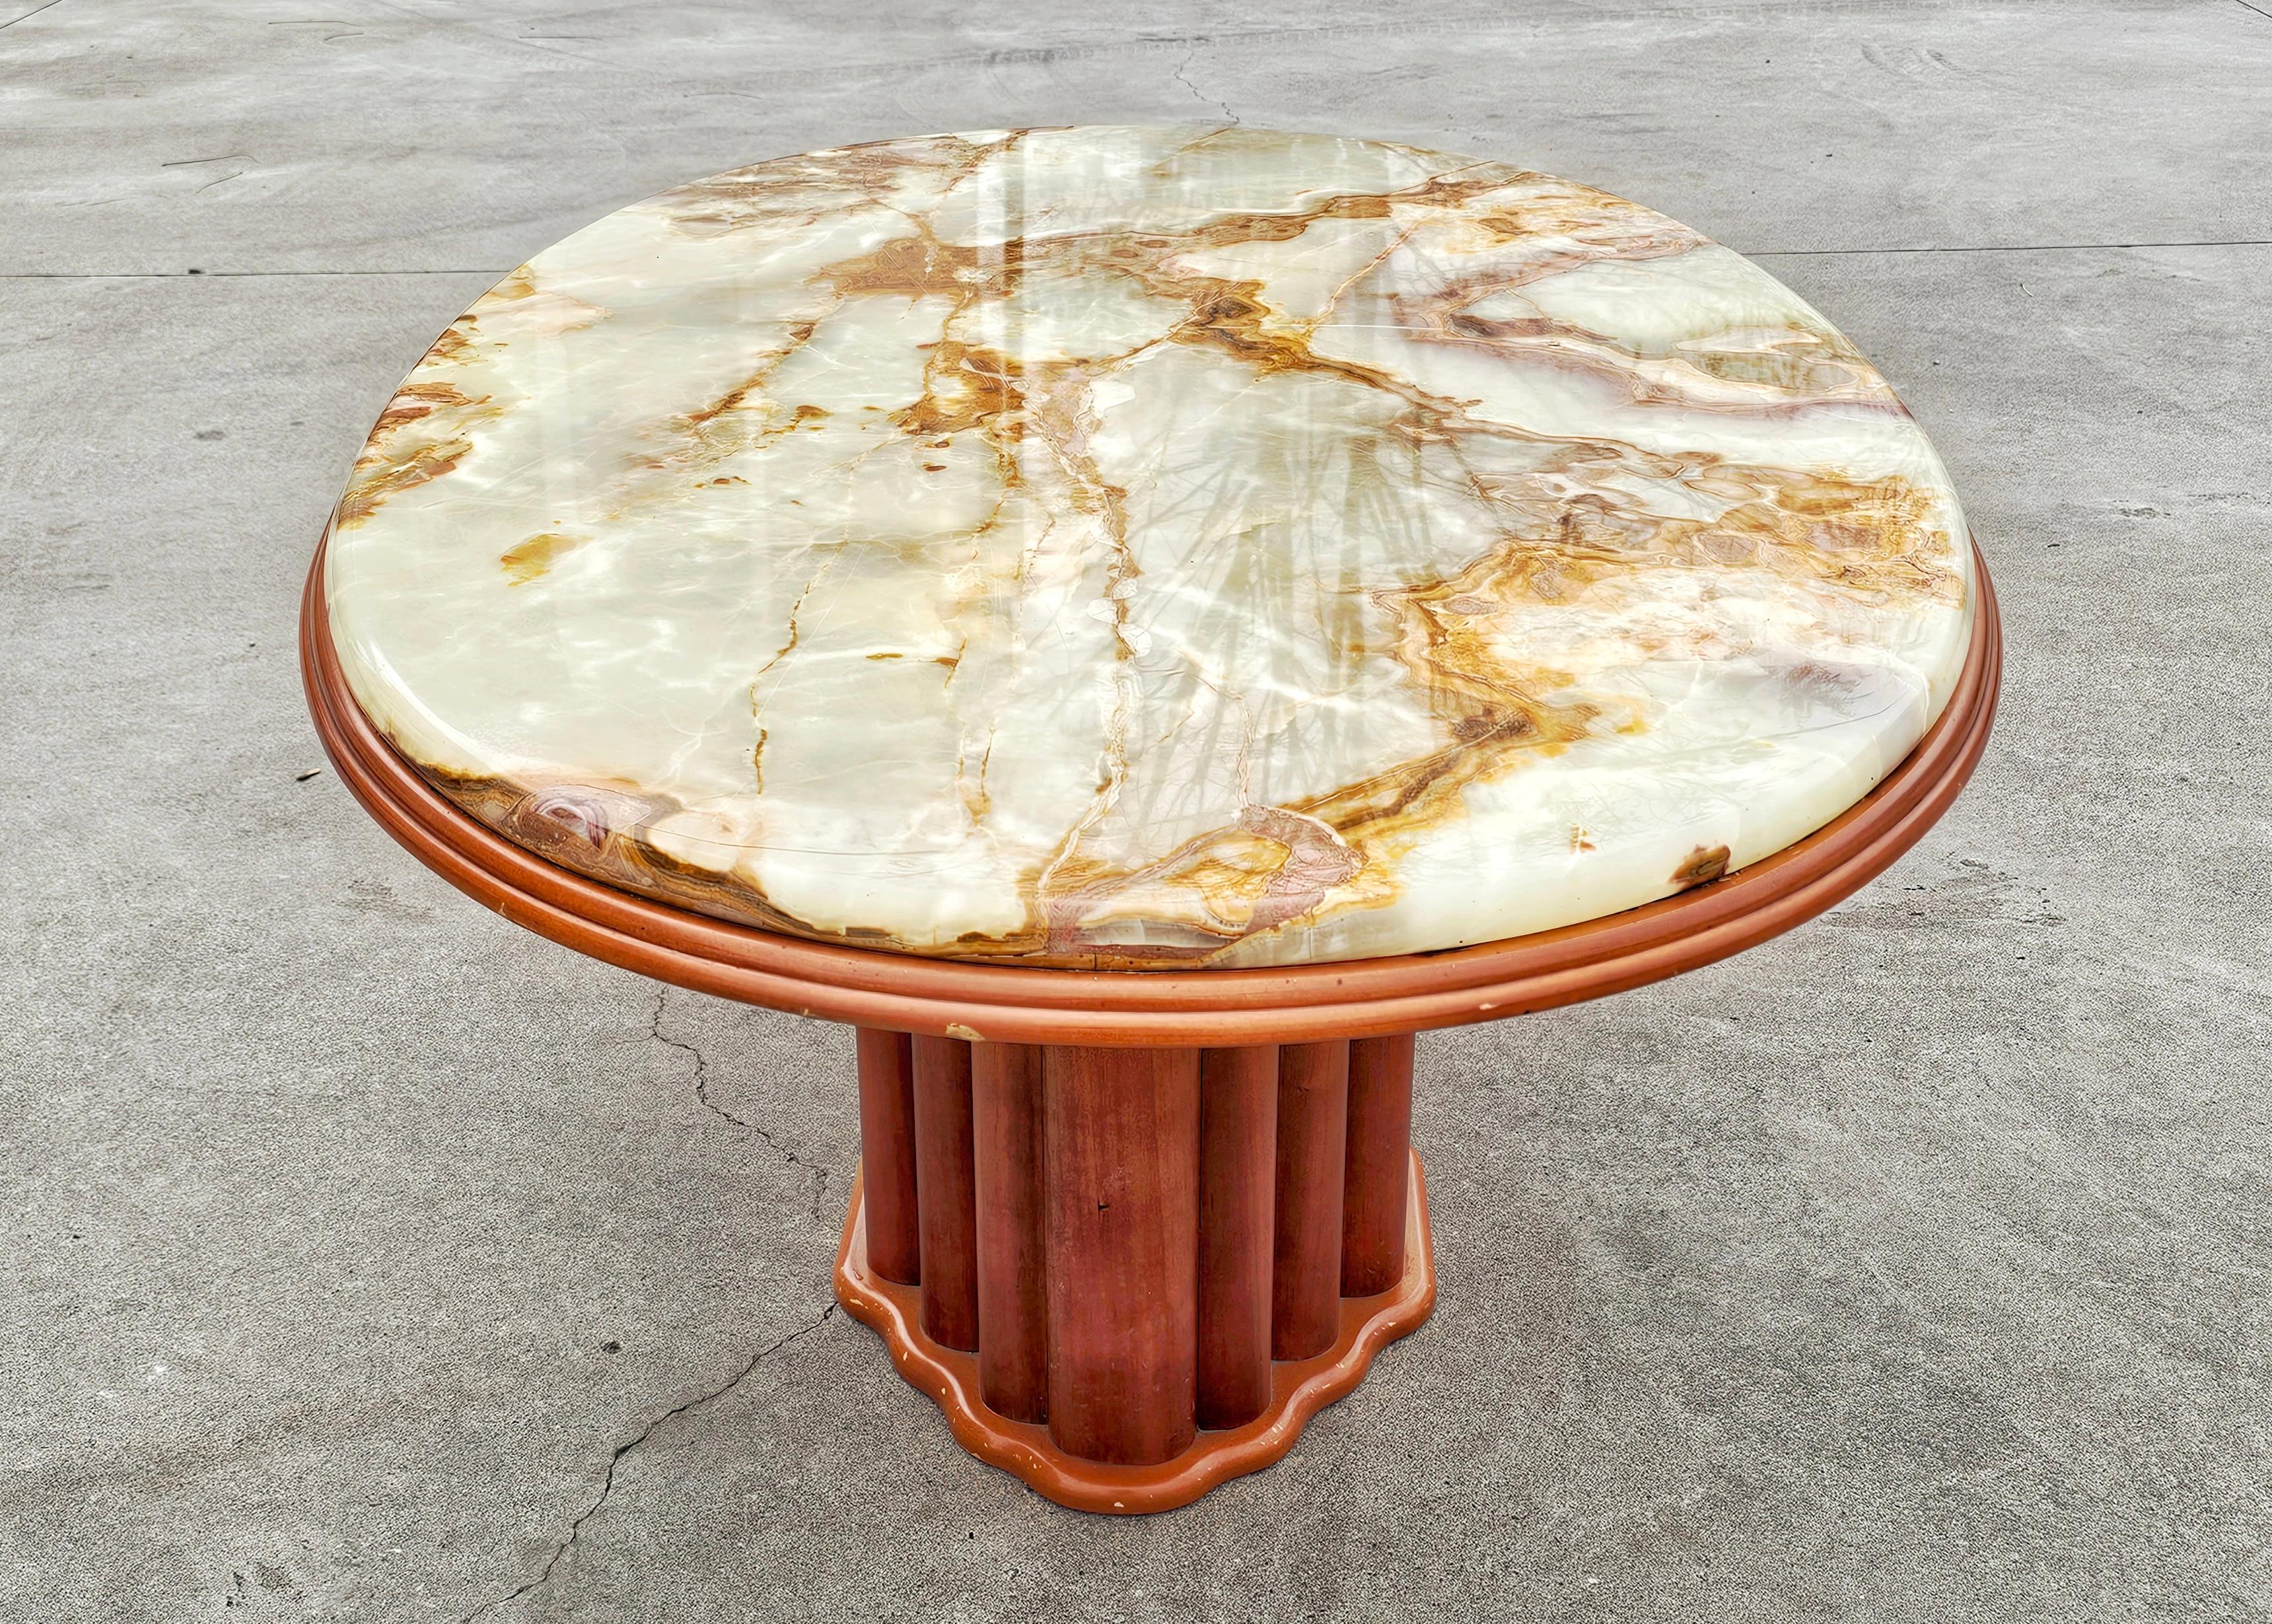 Art Deco Inspired Coffee Table with Onyx Top by Hohnert Design, Germany 1970s For Sale 11